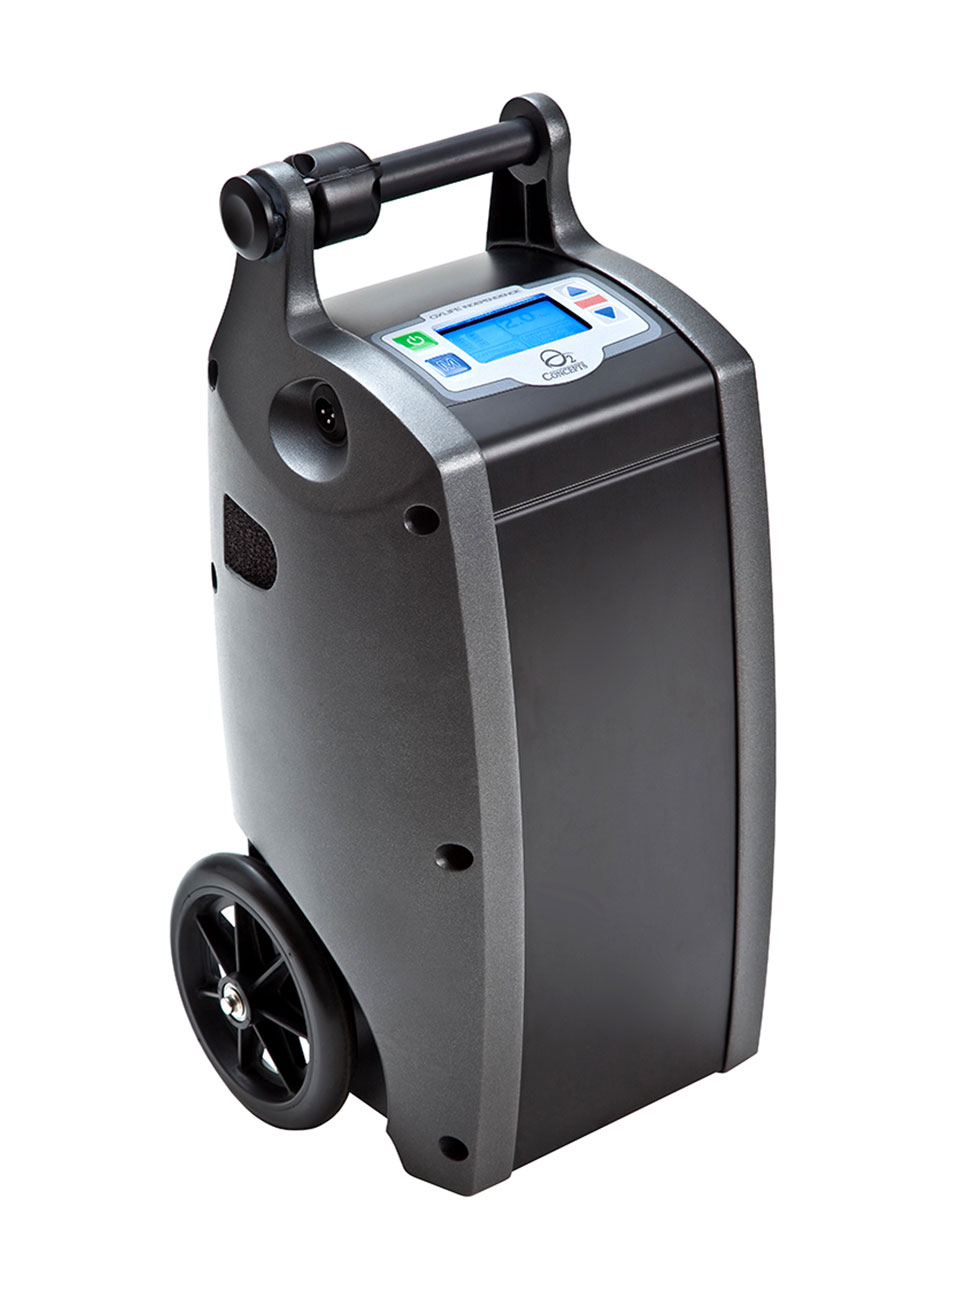 If you're looking for Oxygen Solutions' world's first smart POC, look no further! This concentrator is fully equipped to get you help whenever you need it!